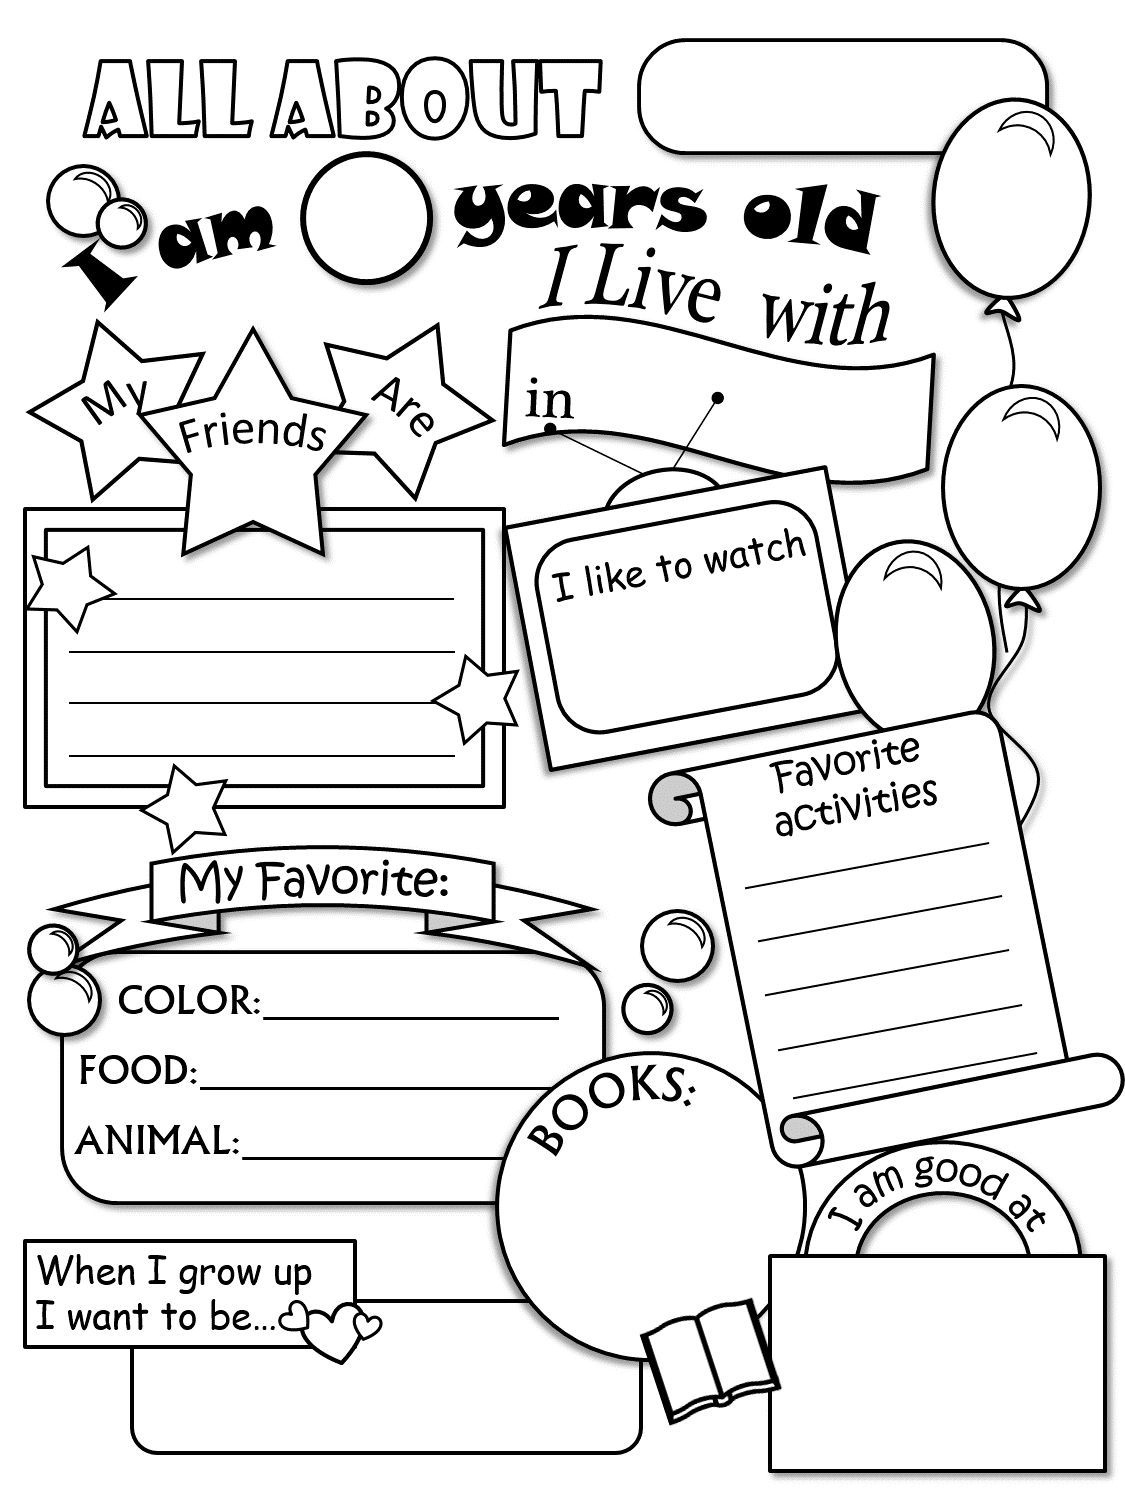 All About Me Form Free Printable